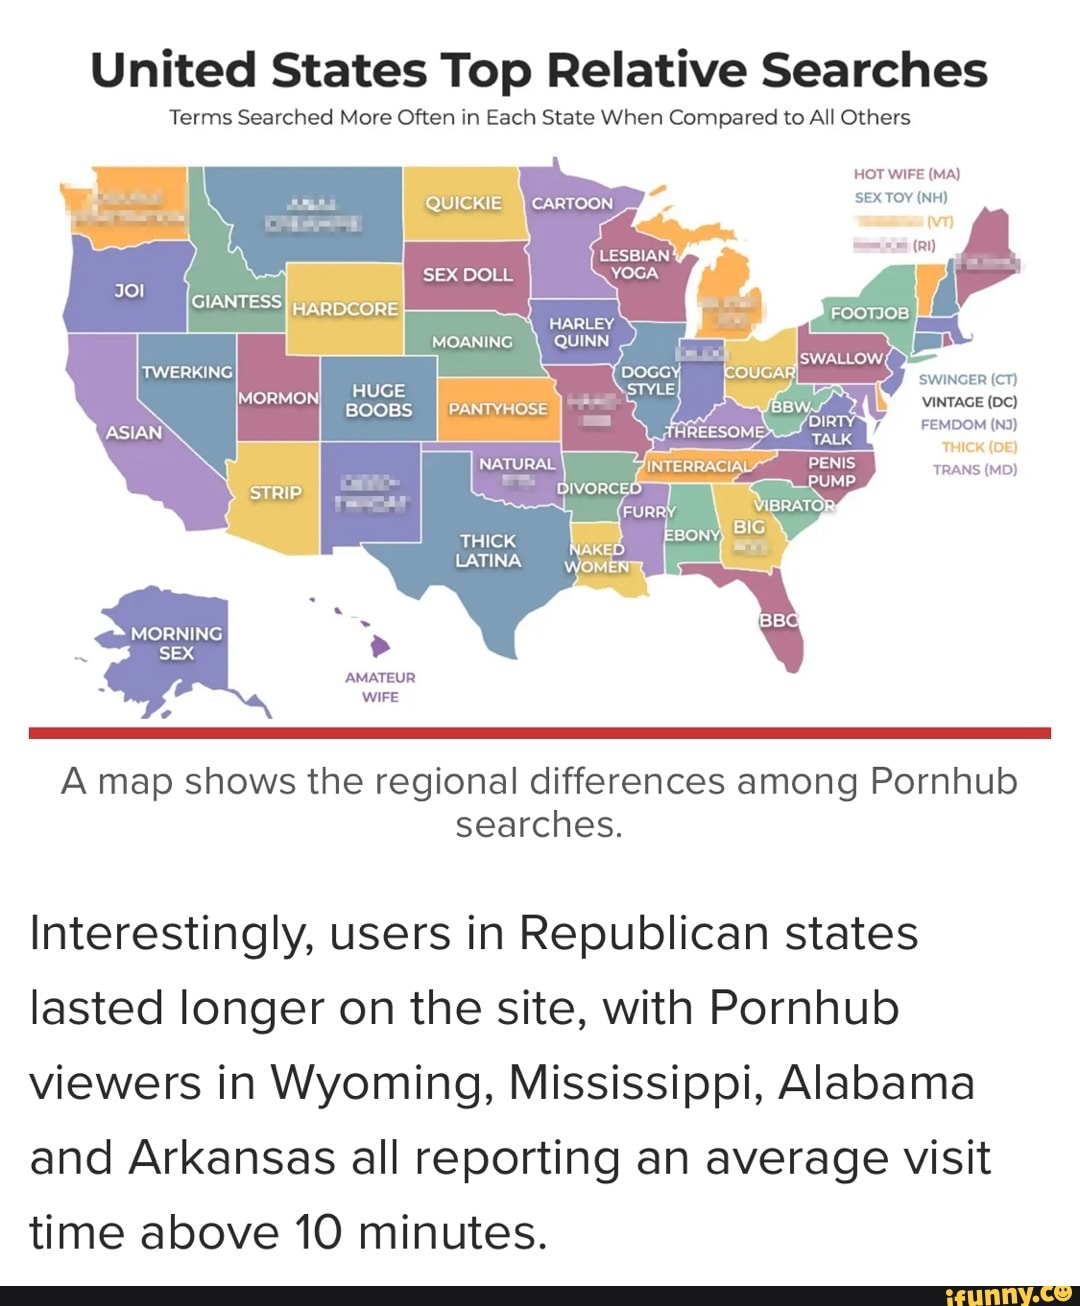 United States Top Relative Searches Terms Searched More Often in Each State When Compared to pic image